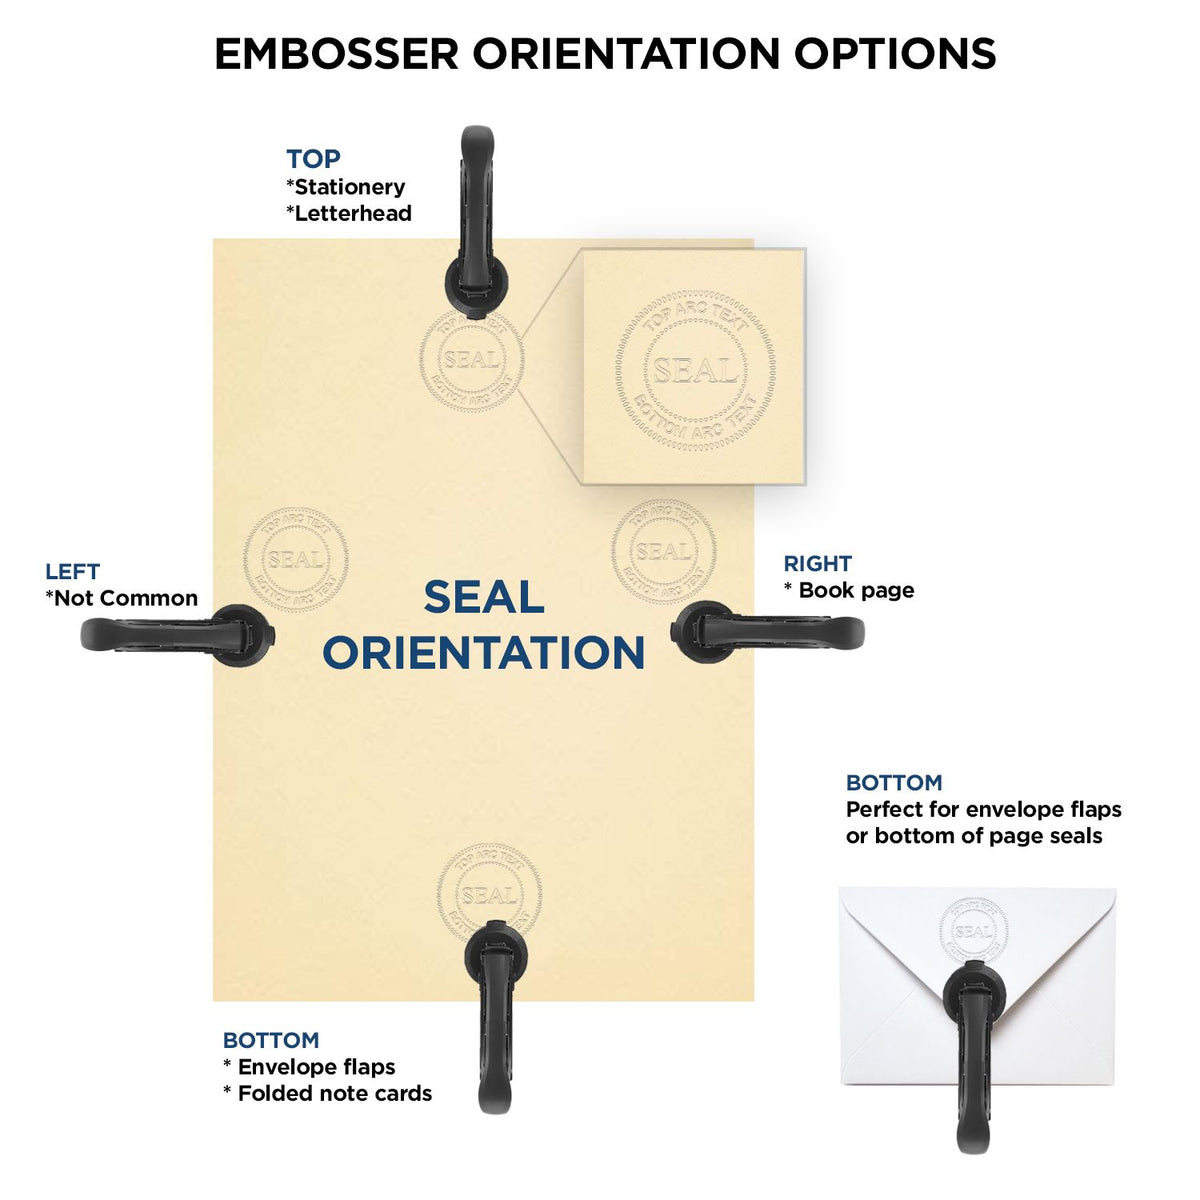 An infographic for the Iowa Geologist Desk Seal showing embosser orientation, this is showing examples of a top, bottom, right and left insert.